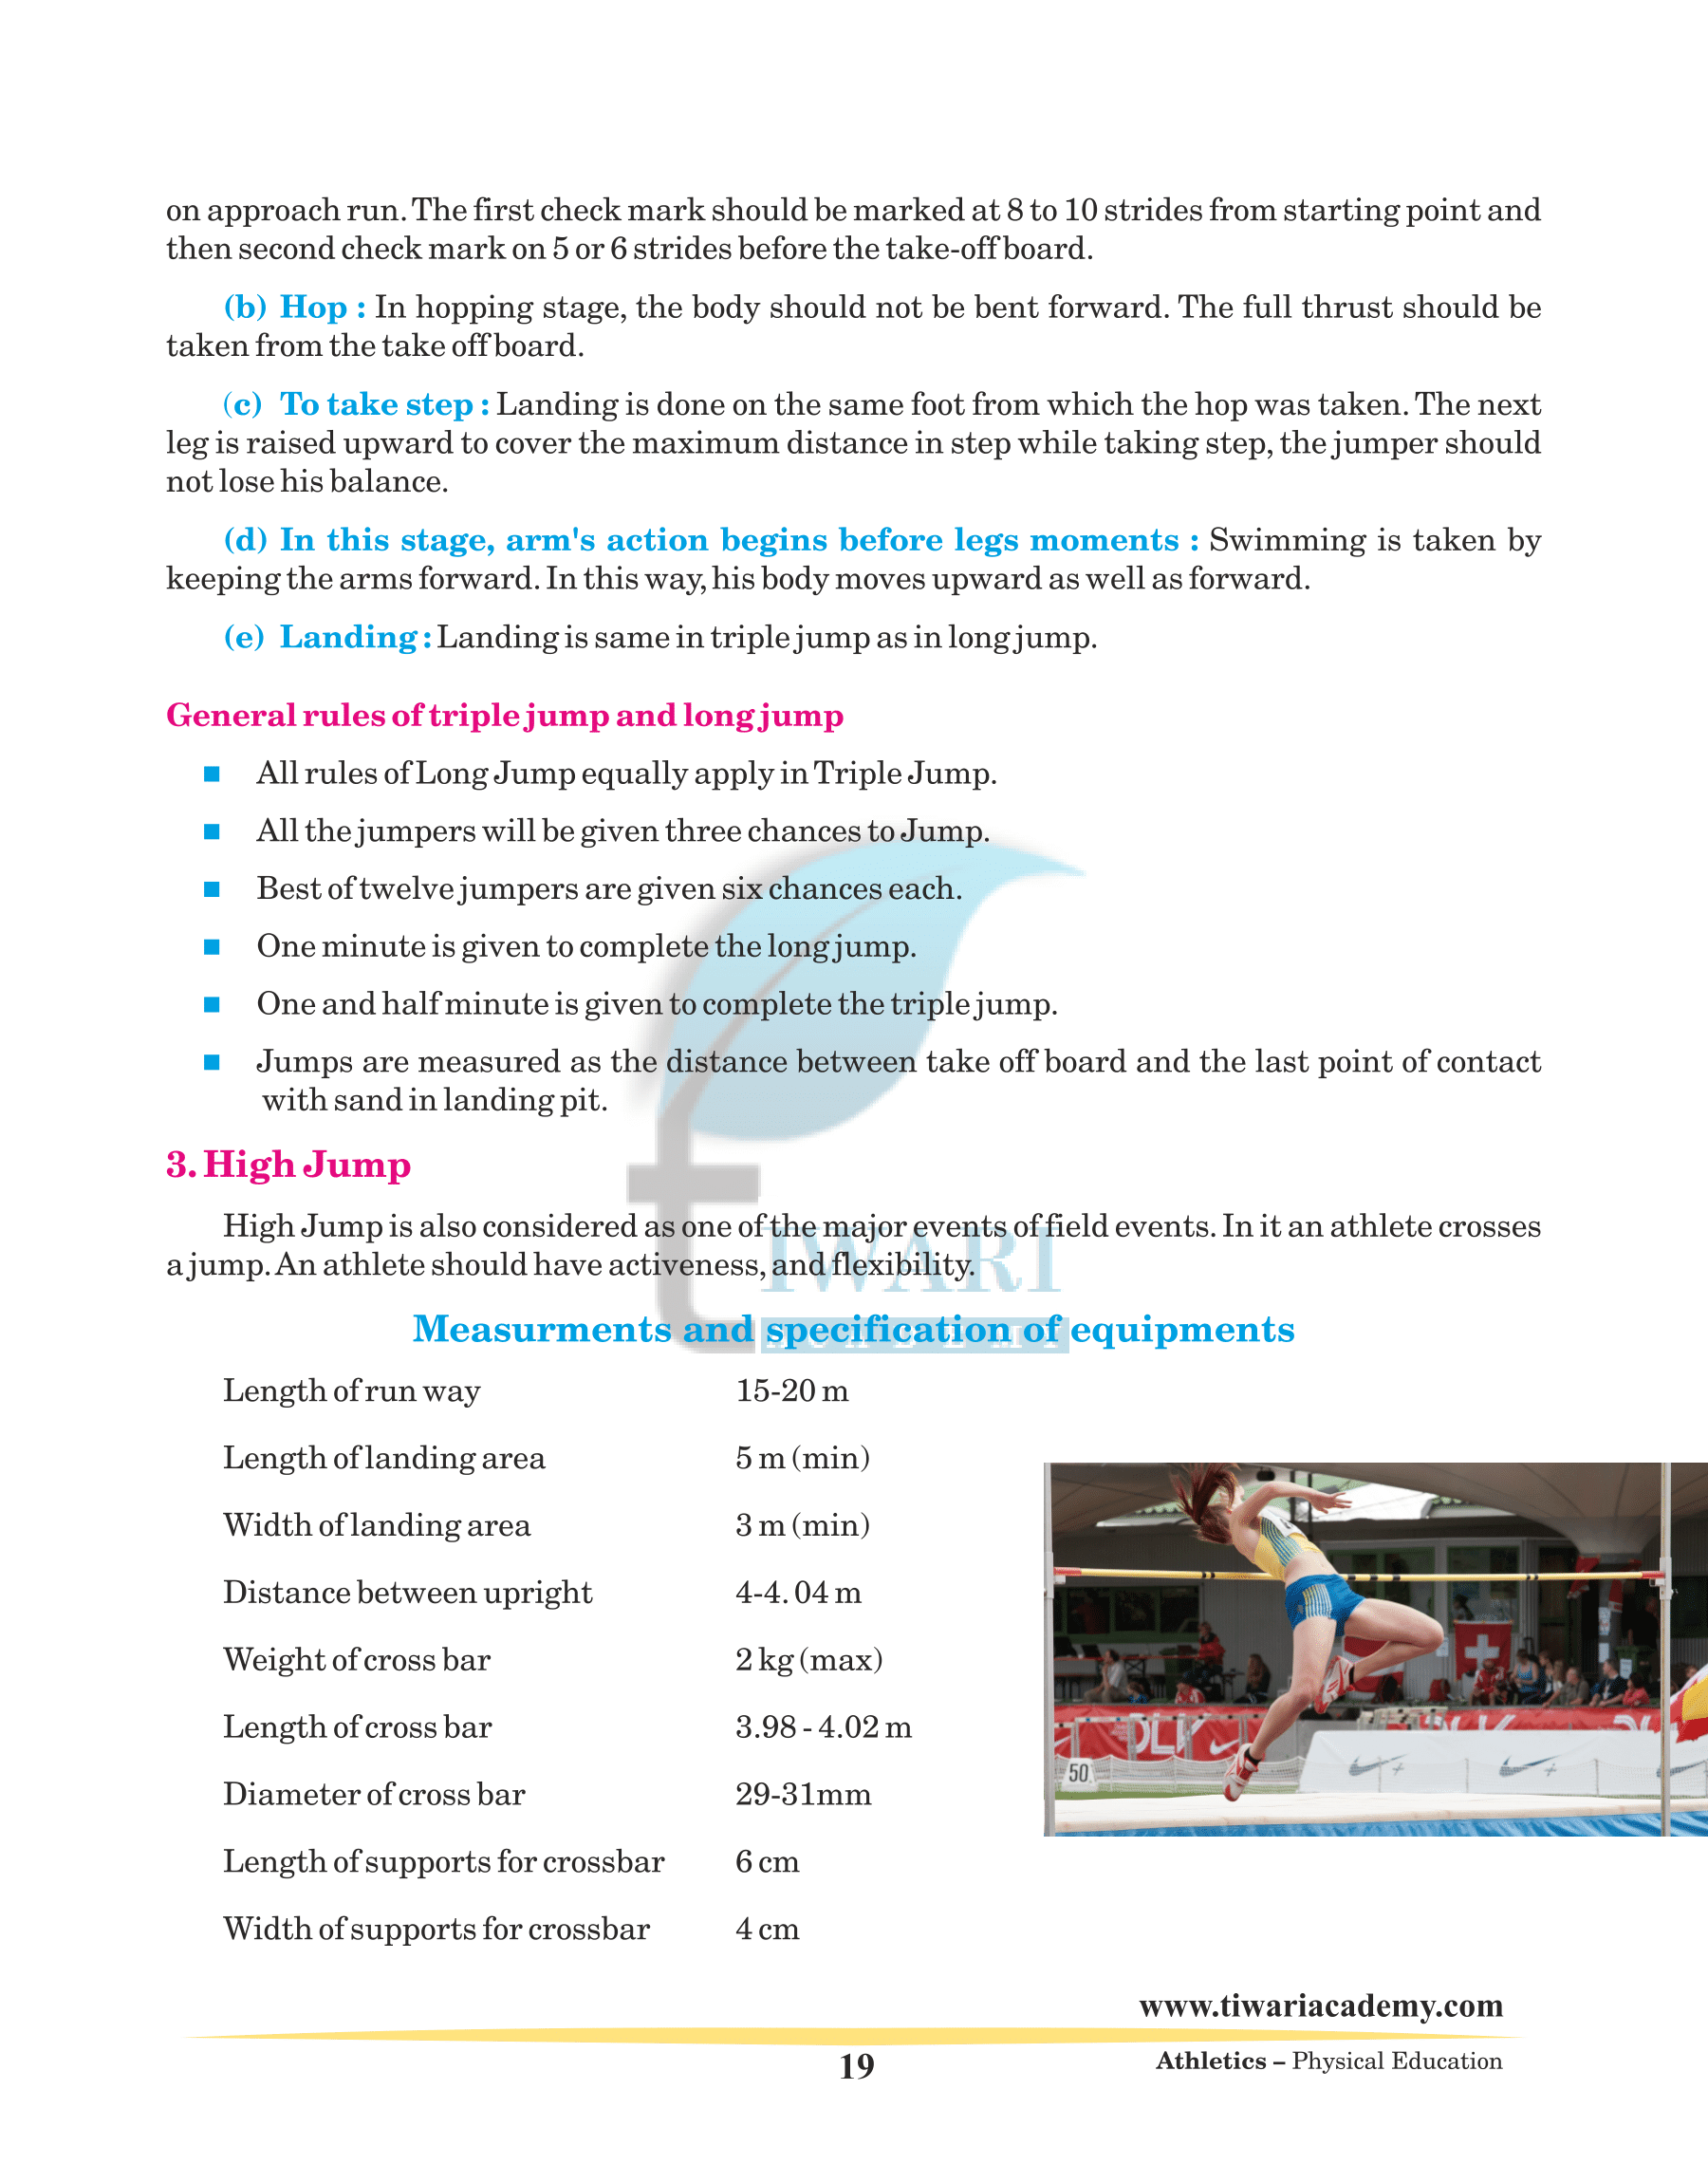 Athletics and its components